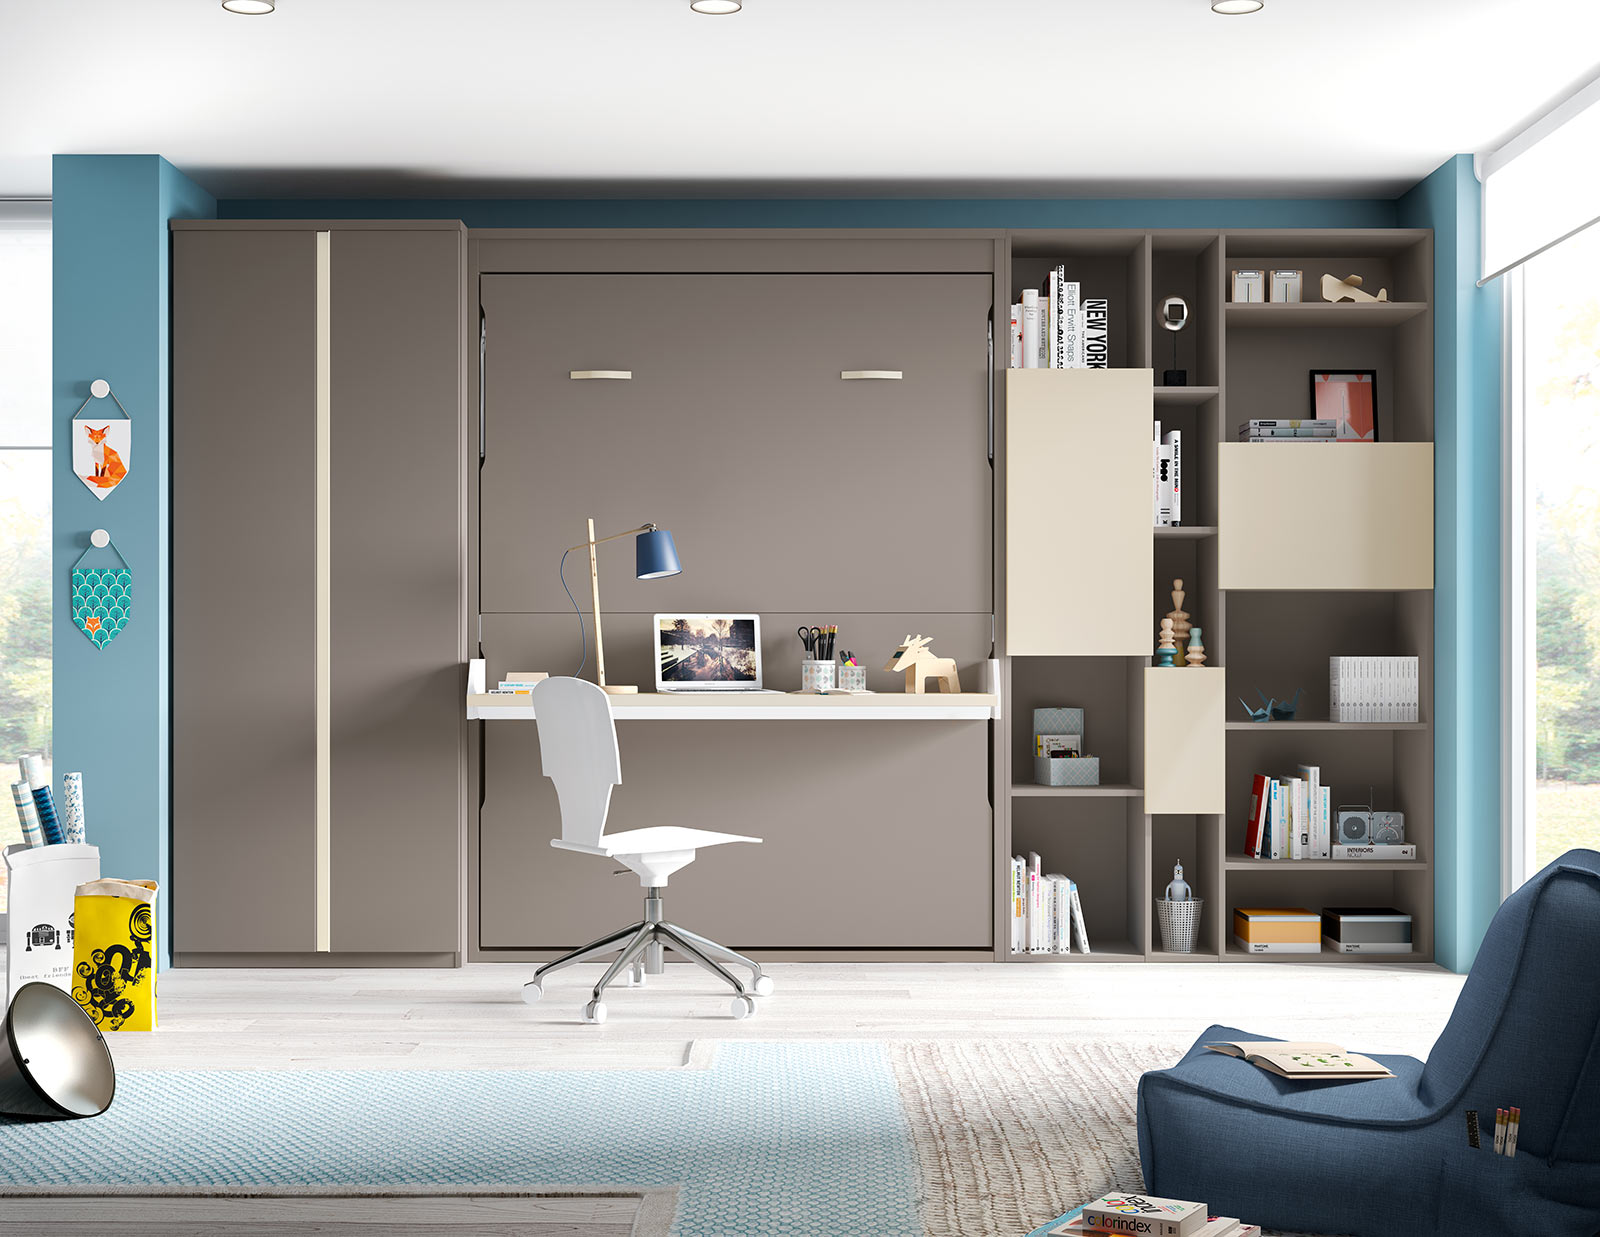 Space Deskbed The London Wallbed Company, Murphy Bed Converts To Desktop